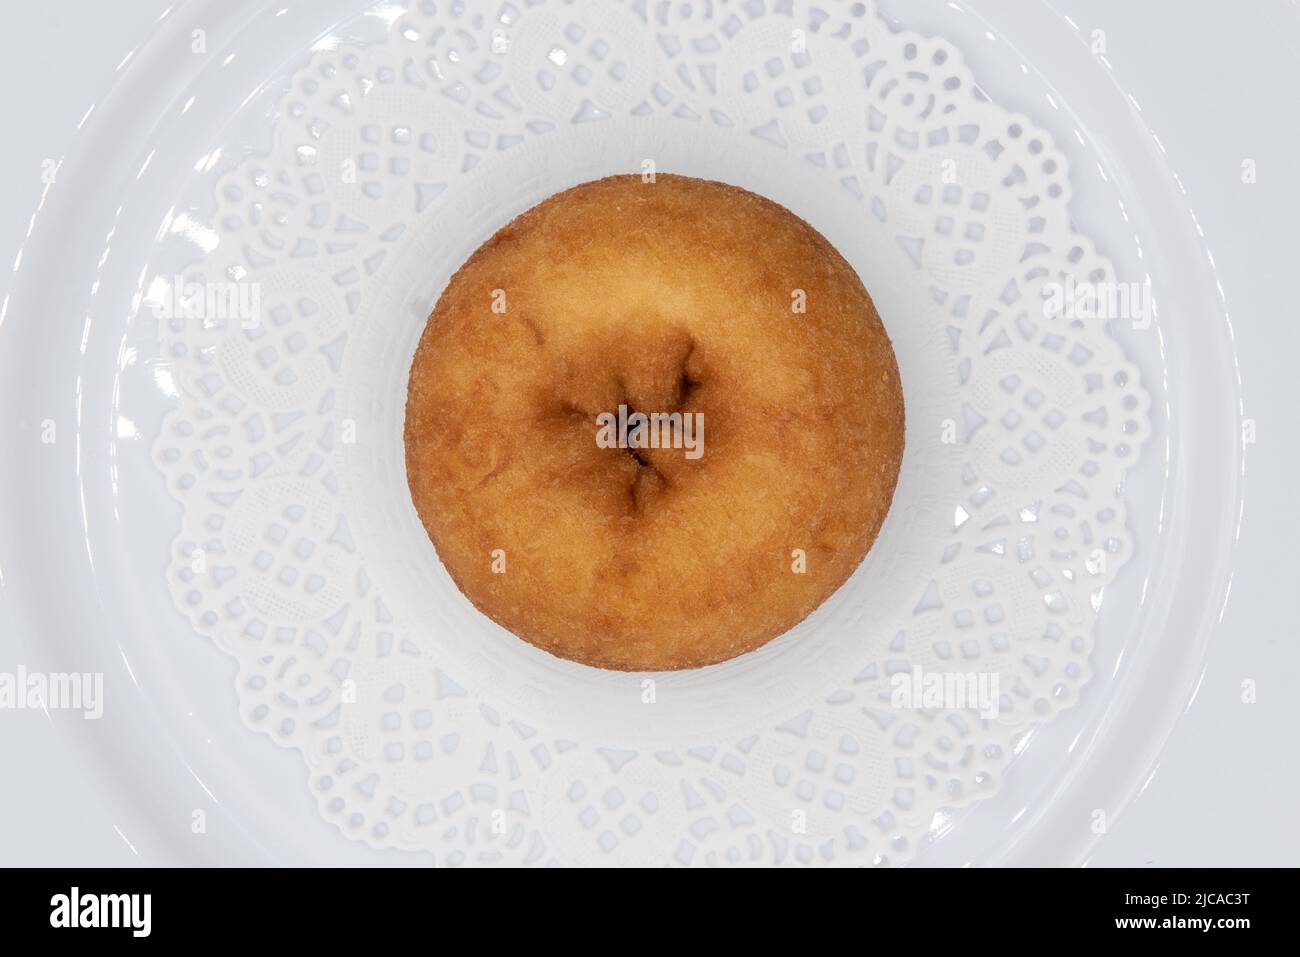 Overhead view of tempting fresh from the oven plain donut from the bakery served on a plate. Stock Photo